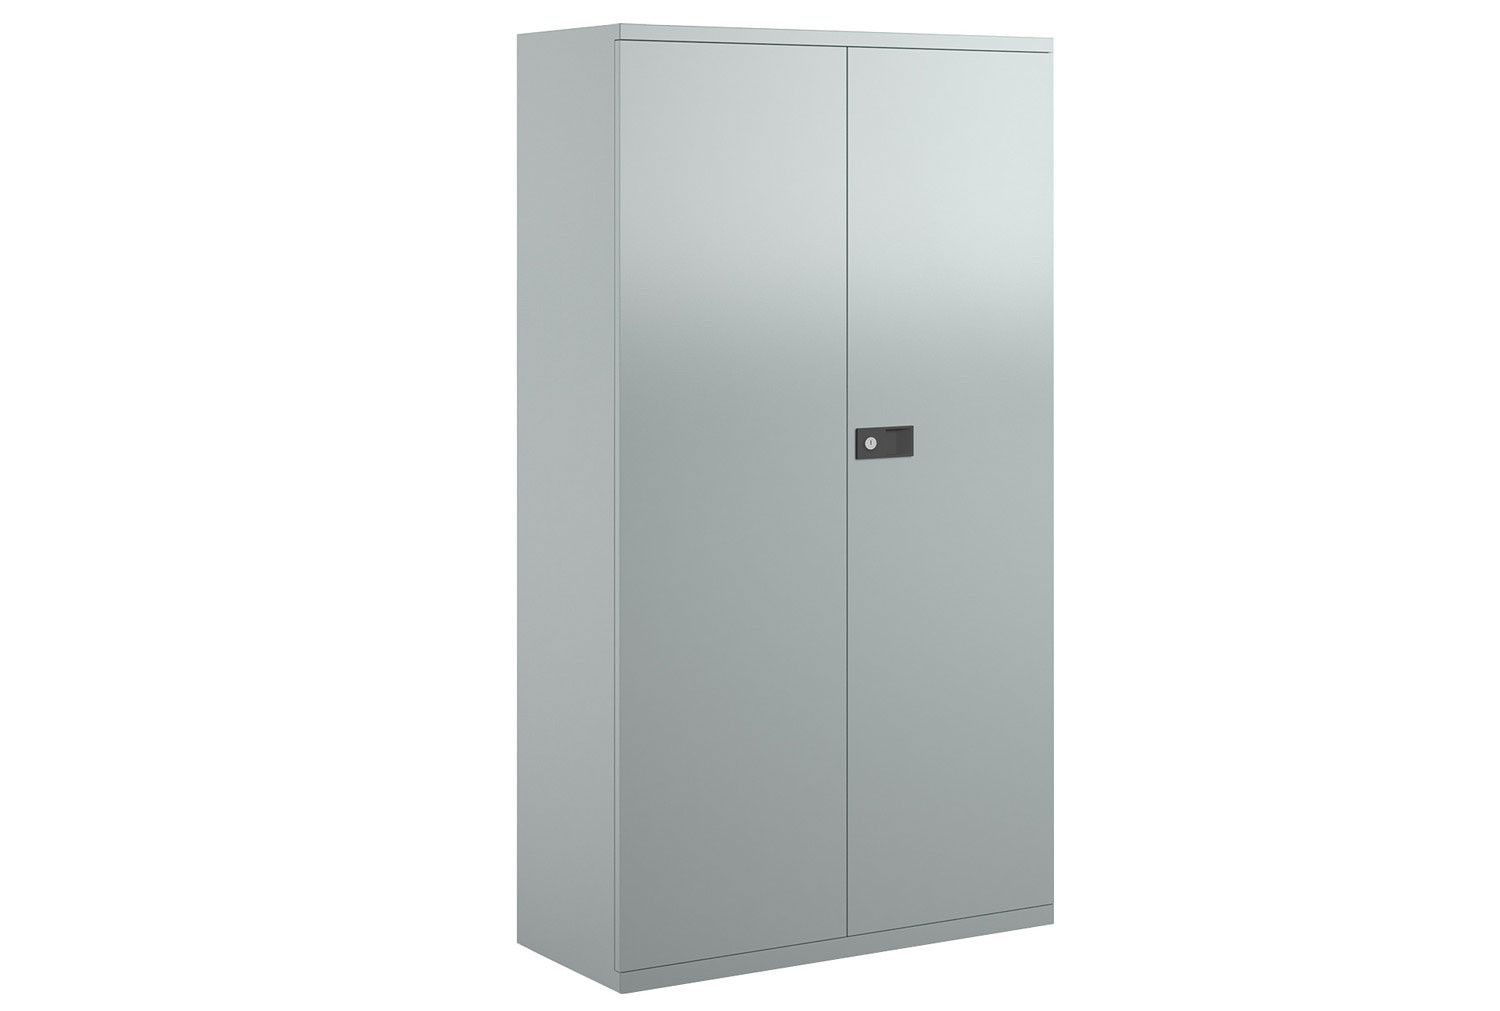 Economy Double Door Office Cupboards, 3 Shelf - 91wx40dx181h (cm), Silver, Fully Installed